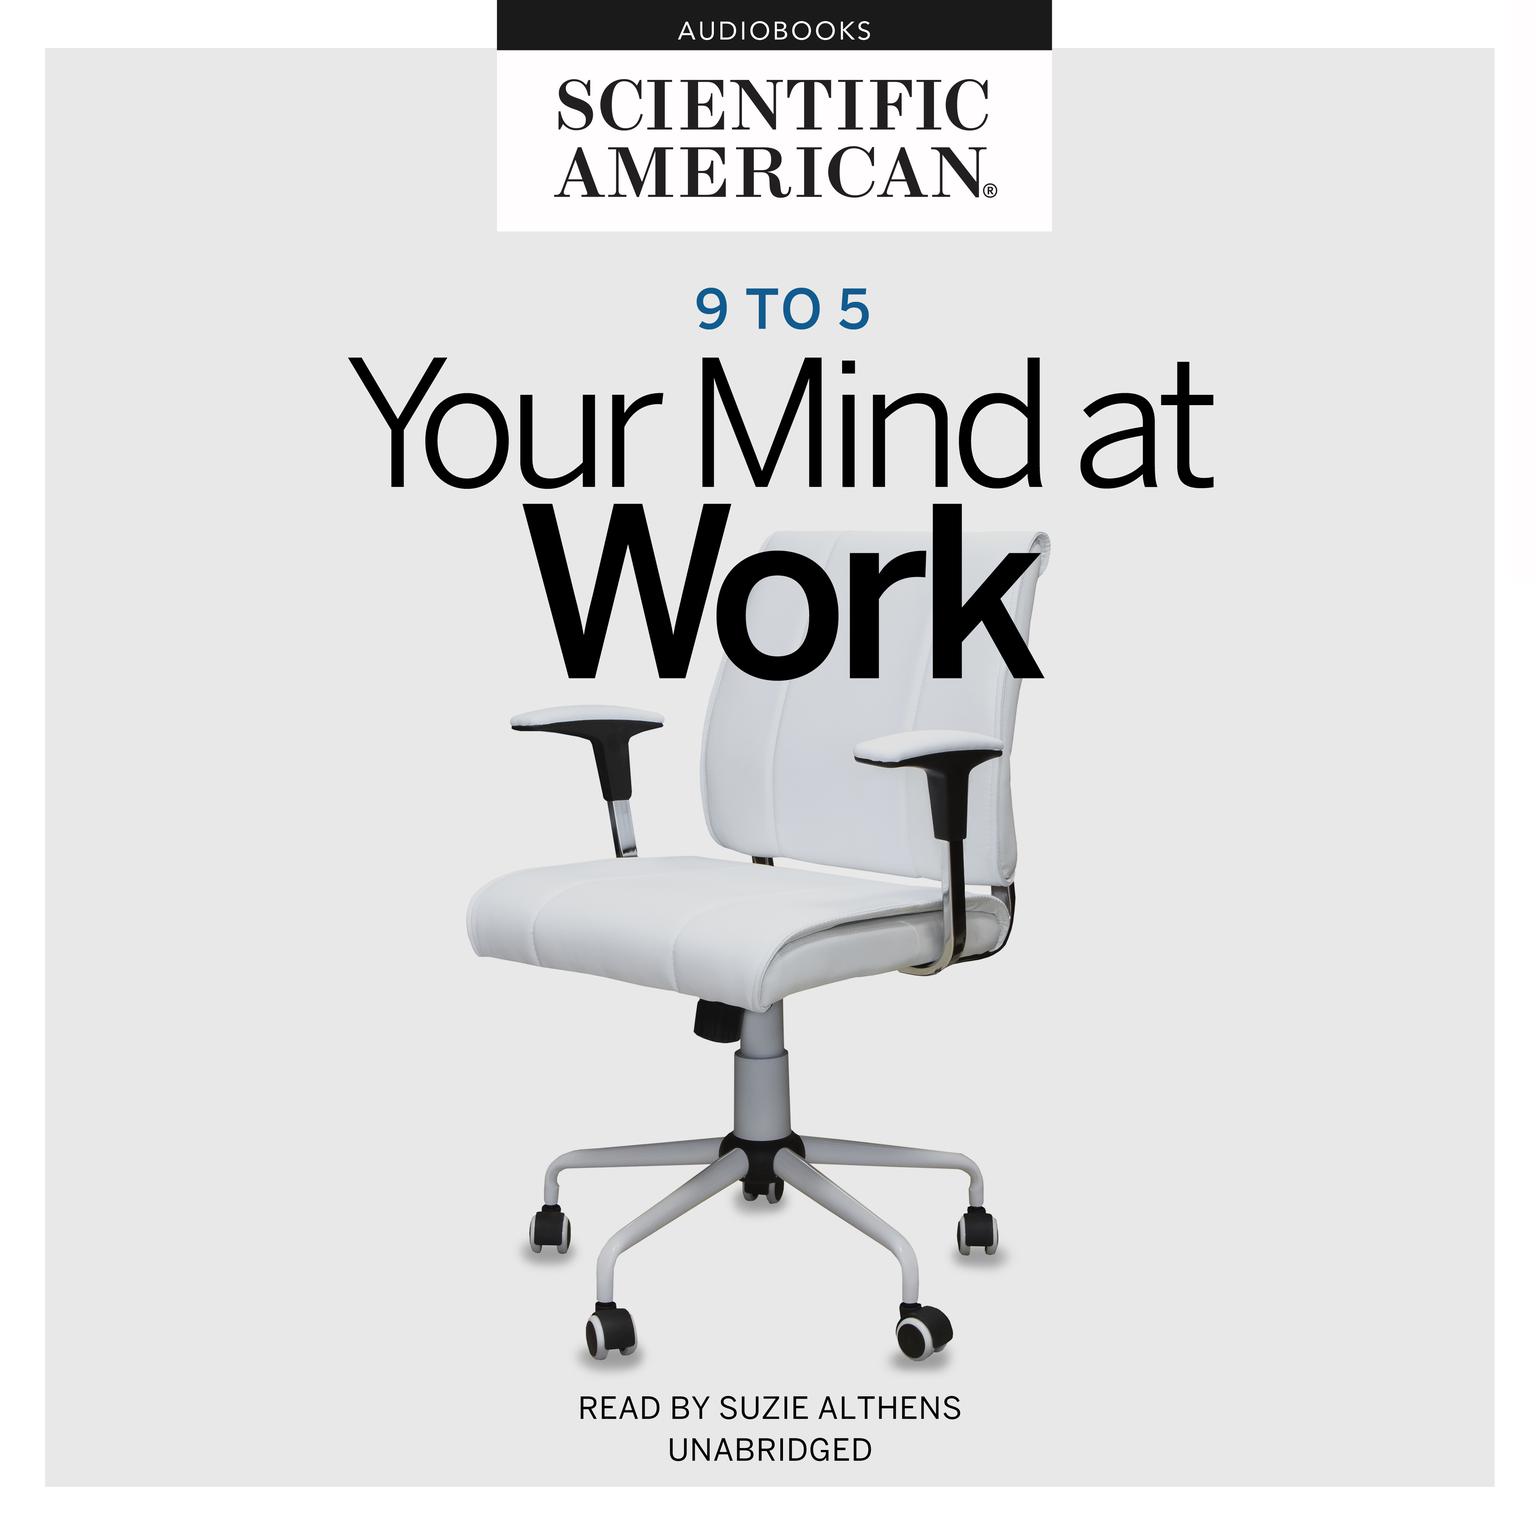 9 to 5: Your Mind at Work Audiobook, by Scientific American